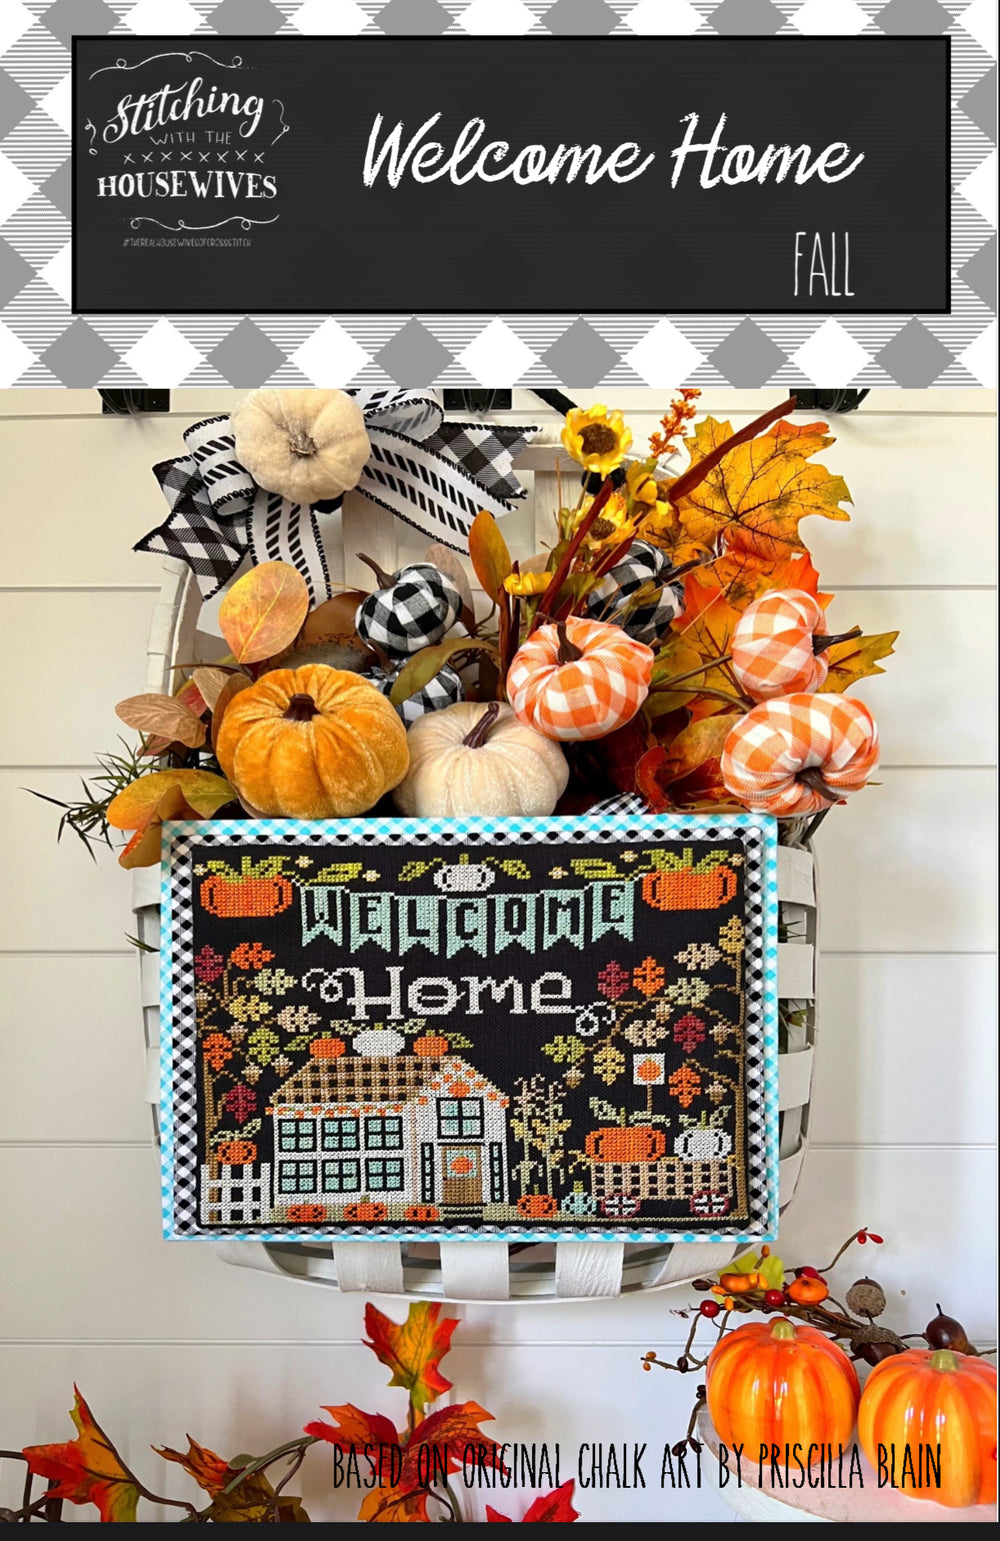 Welcome Home- Fall by Stitching with the Housewives